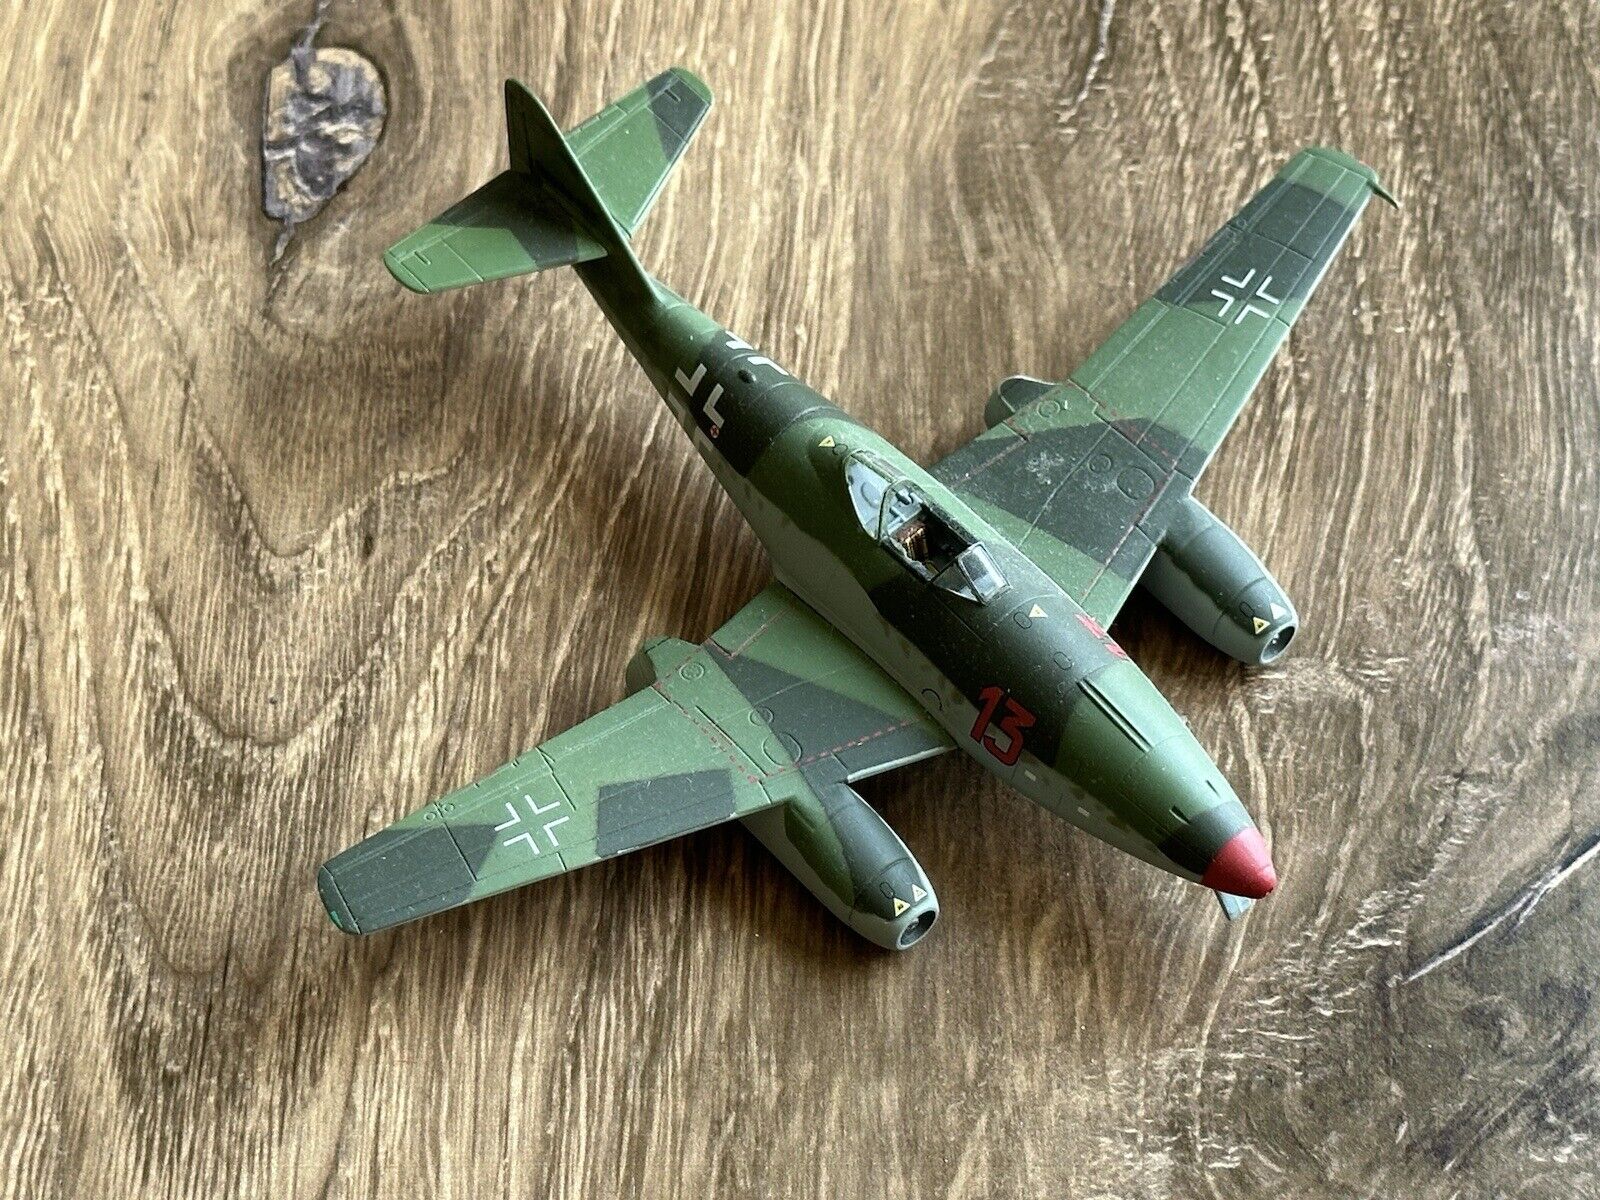 ME-262A1A RED KOMMANDEUR AIRCRAFT SCALED MODEL METAL WITH FLAWS